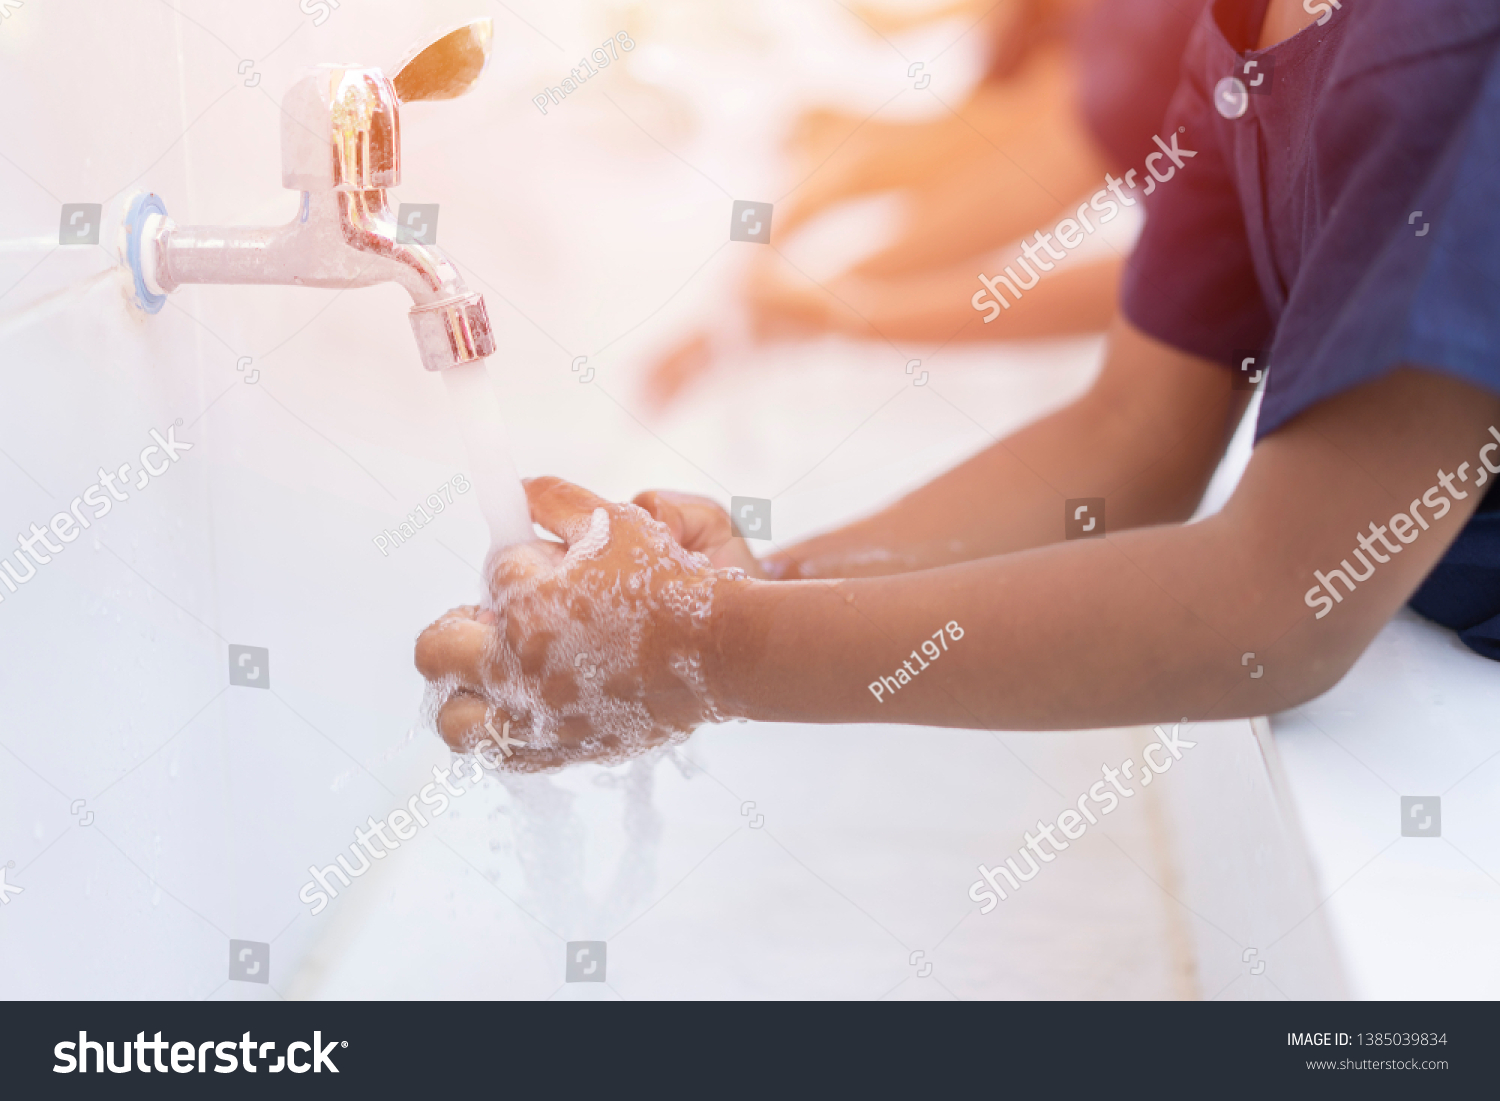 close up hands of children or Pupils At preschool Washing hands with soap under the faucet with water,copy space for text or product you. clean and Hygiene concept. #1385039834